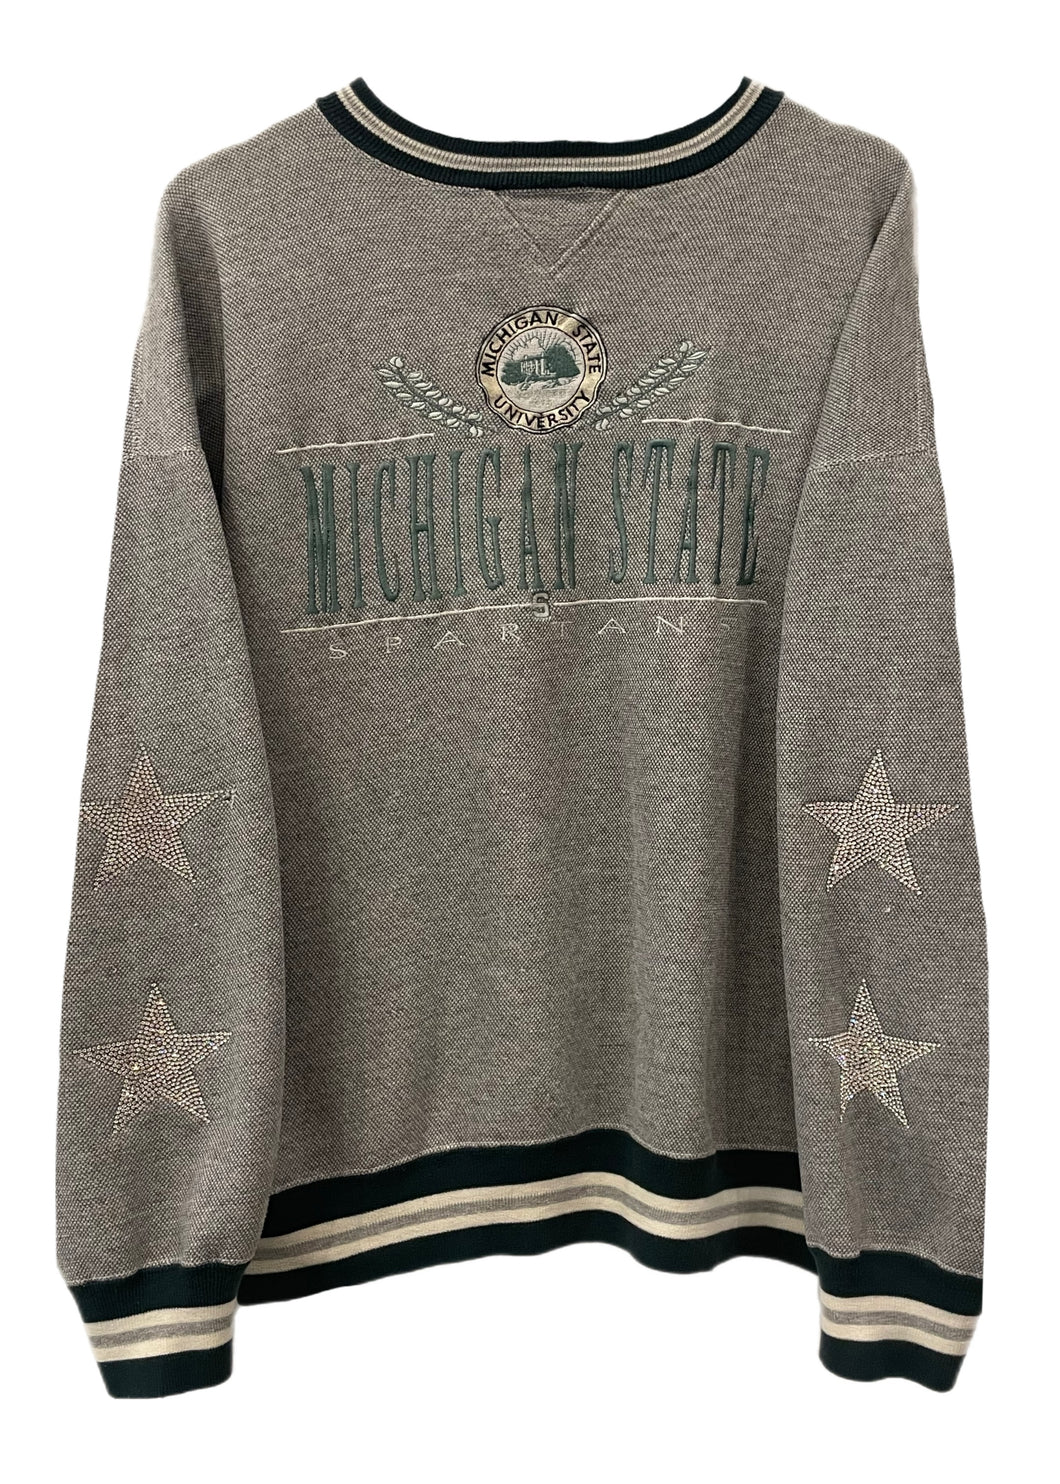 Michigan State University, One of a KIND Vintage Sweatshirt with Crystal Star Design